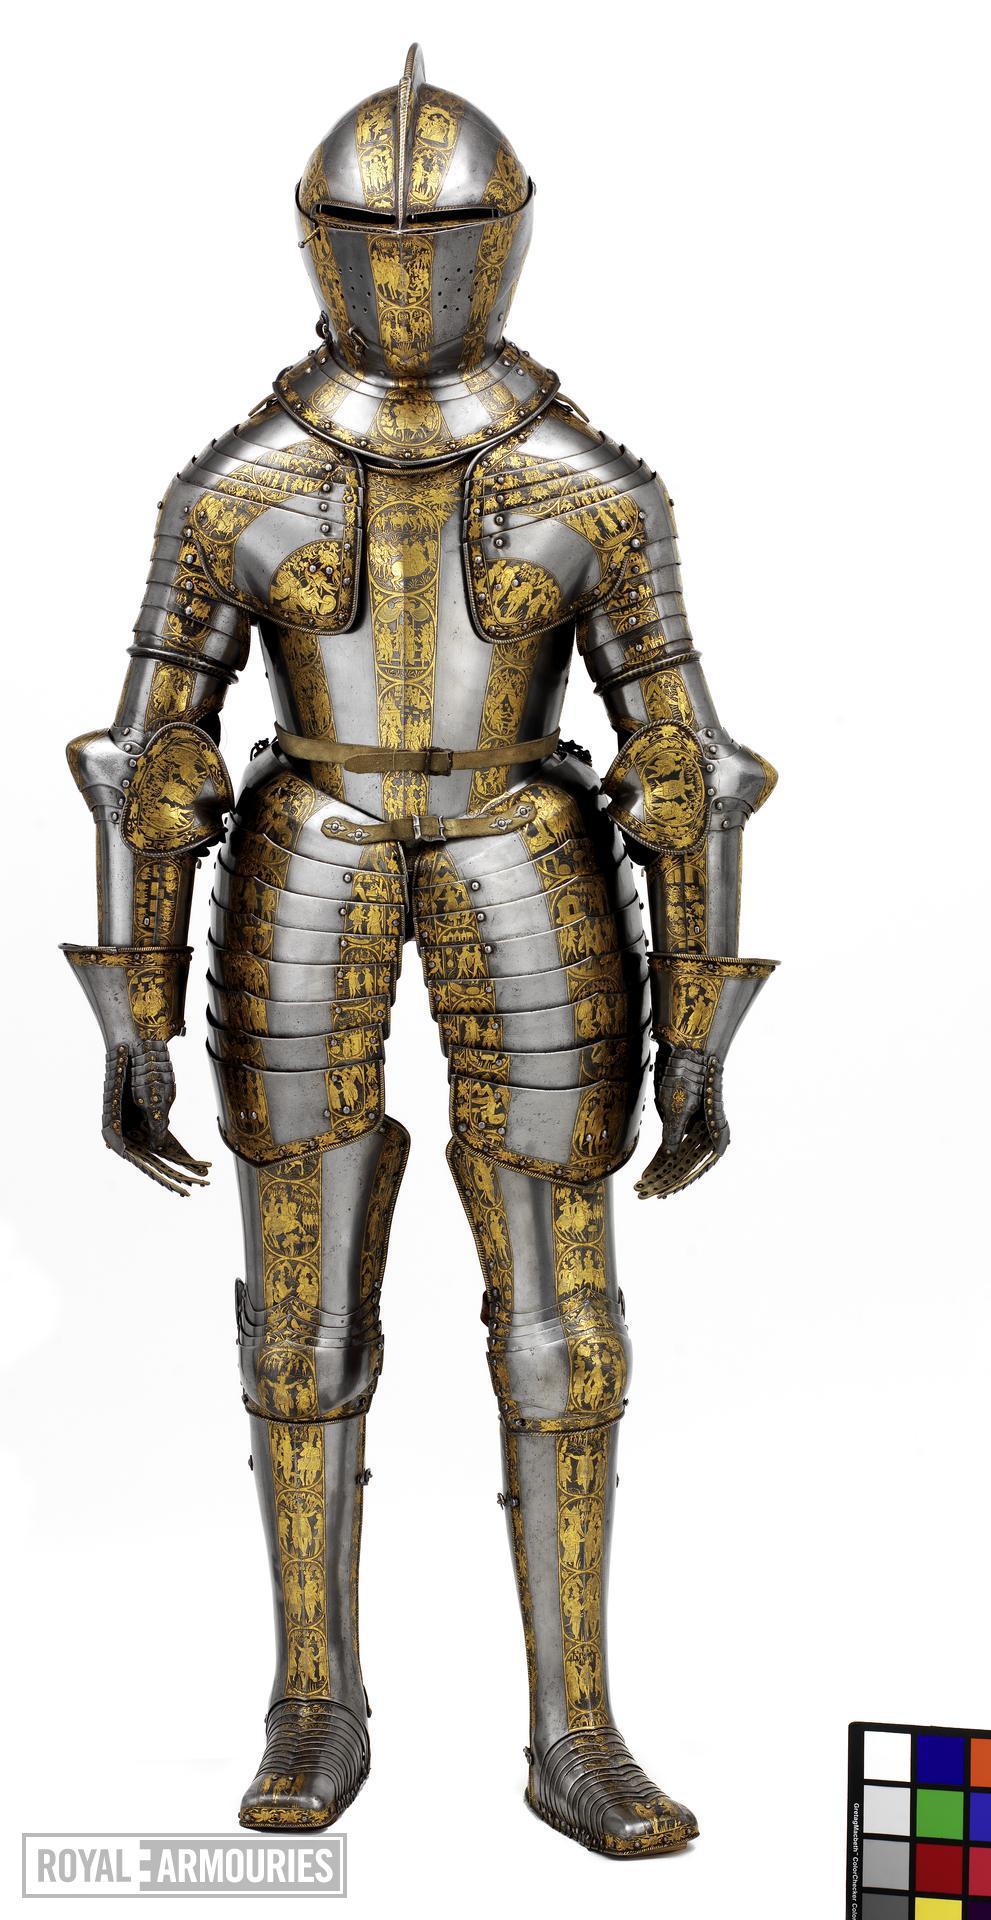 Armor of Henry Prince of Wales - Knight, Middle Ages, Story, Art, Armor, Armor, Gold, Longpost, Knights